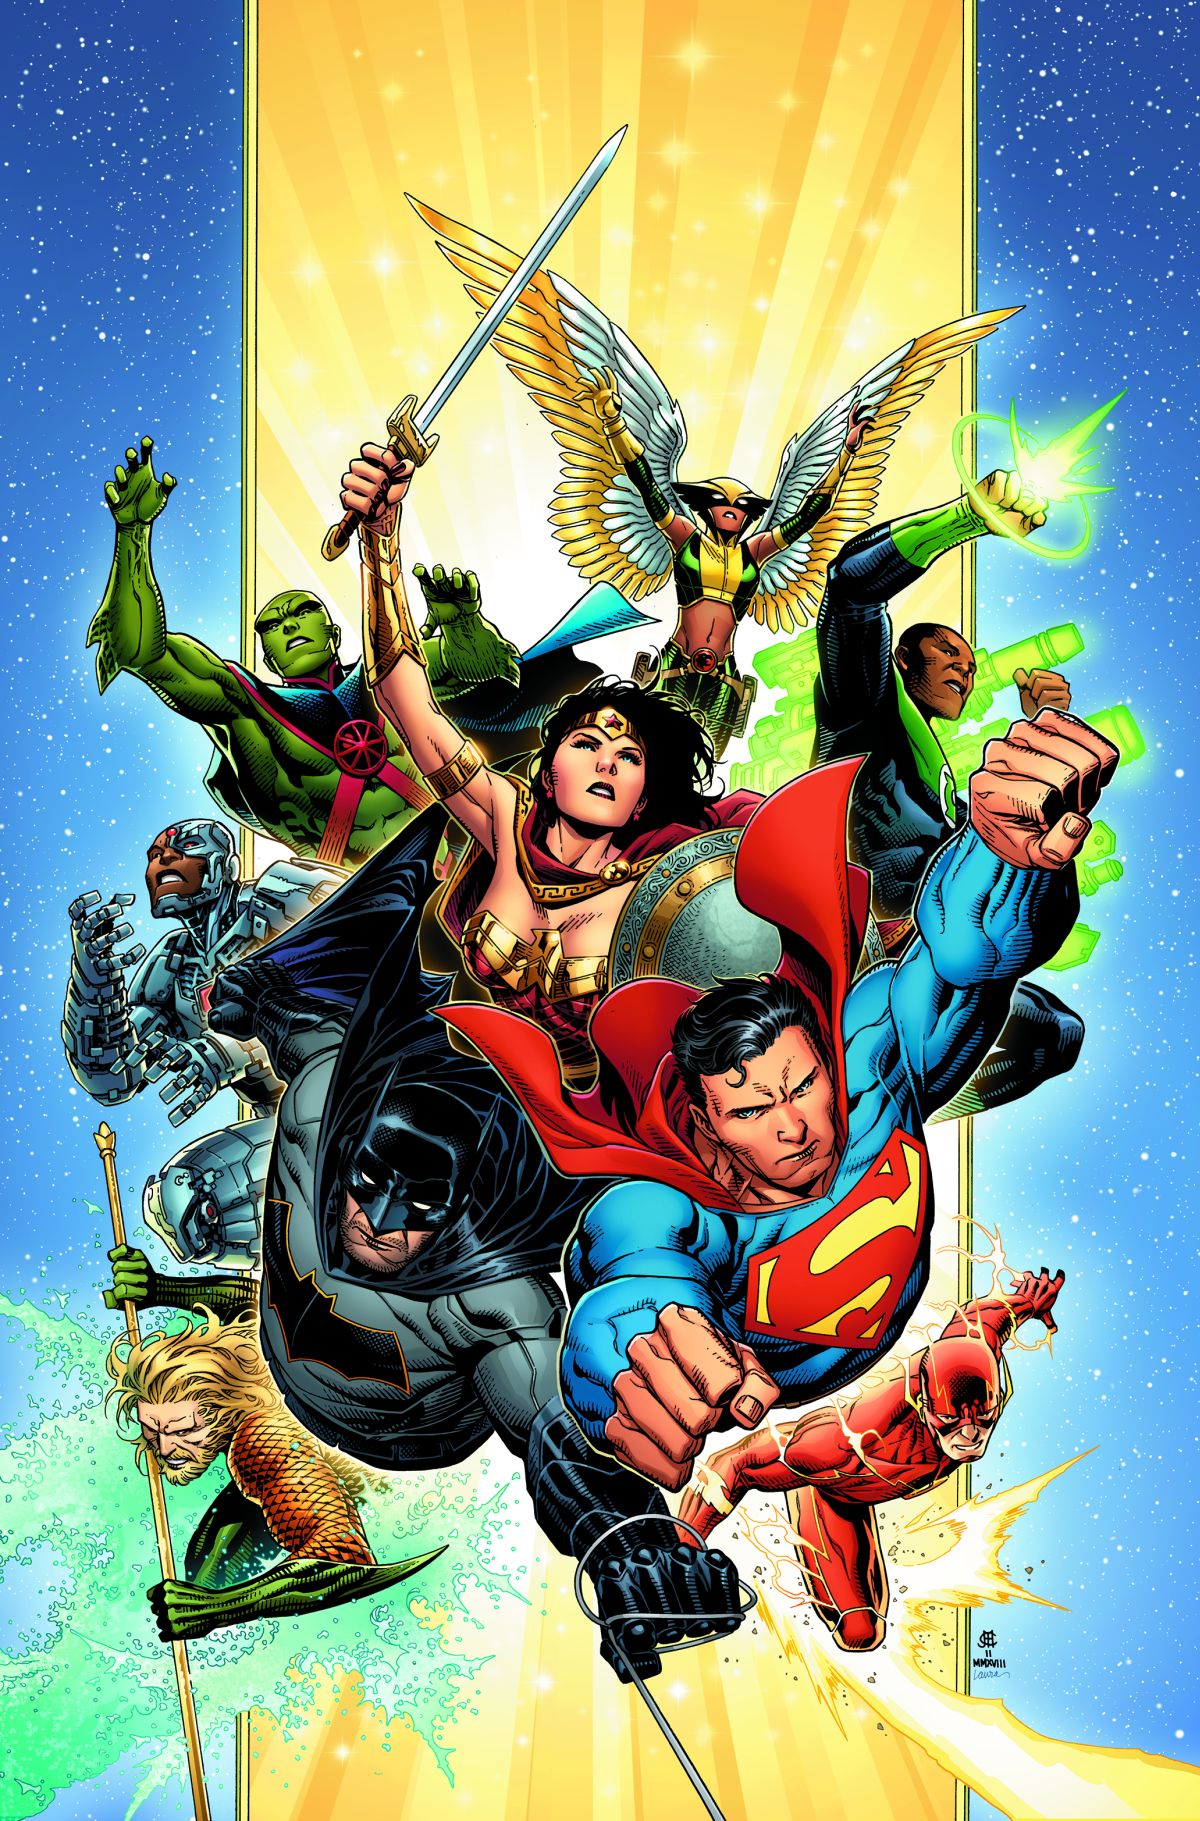 JUSTICE LEAGUE VOL. 1: THE TOTALITY TP